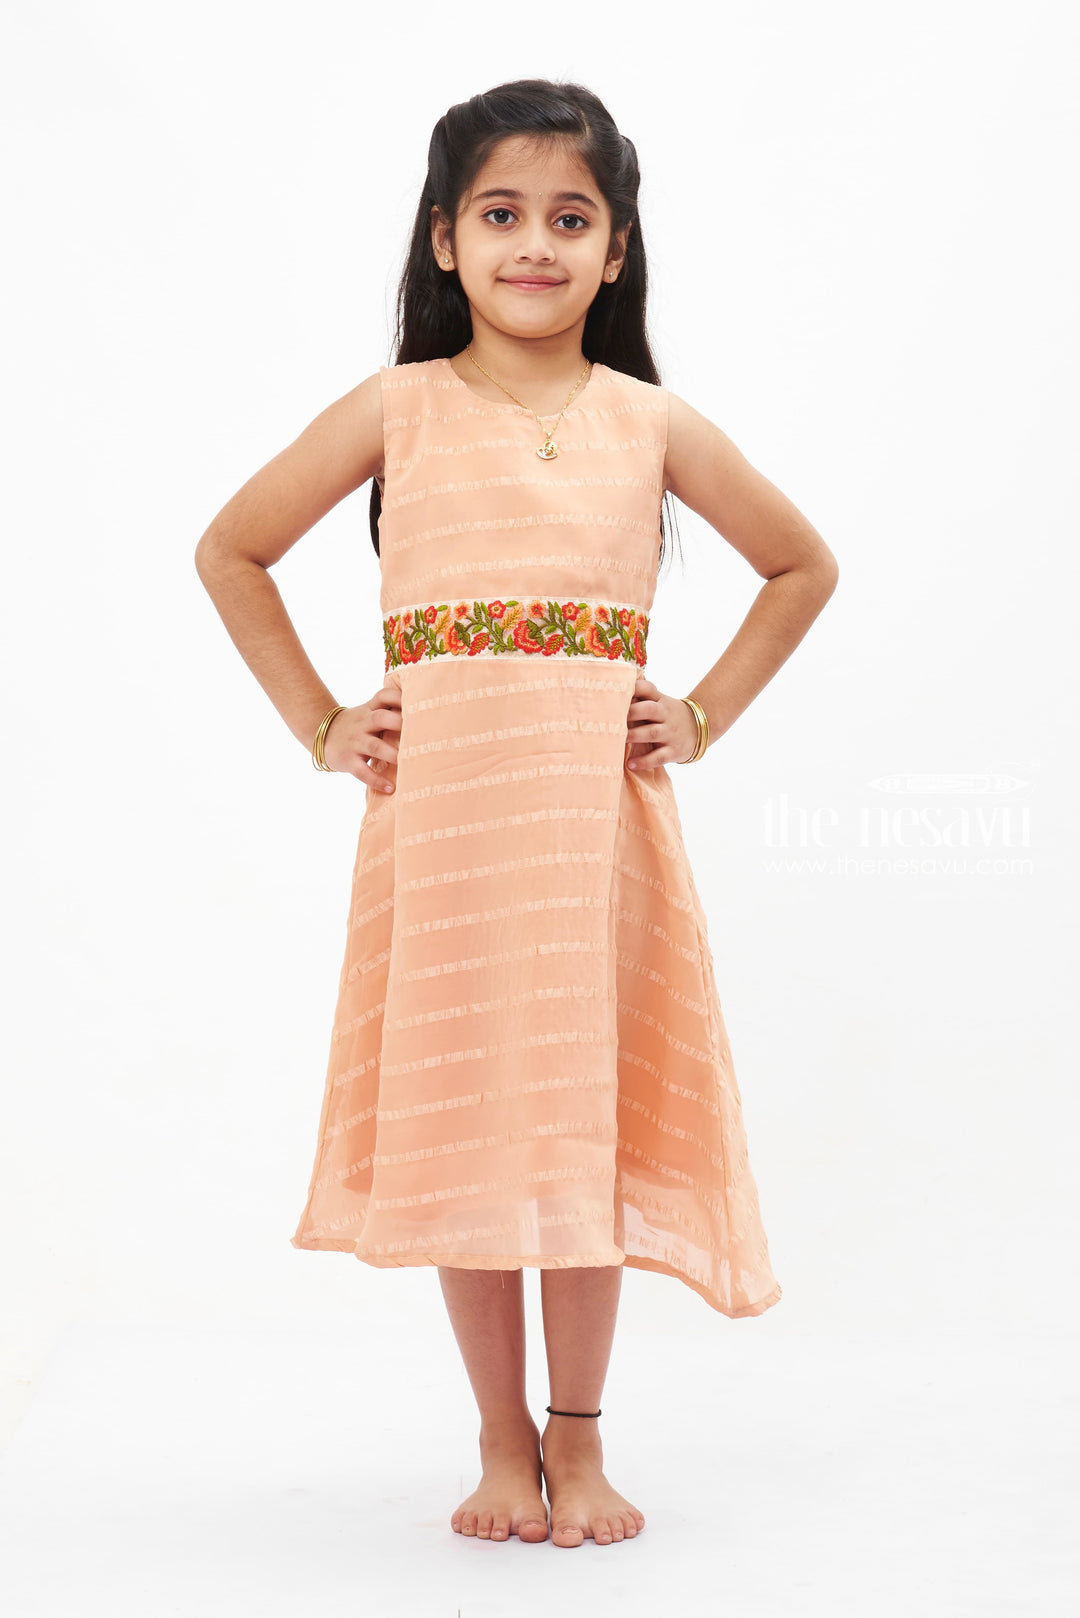 The Nesavu Girls Fancy Frock Orange Perfection Fancy Frock: Delicate Embroidery and Soft Stripes for Girls Nesavu 18 (2Y) / Orange GFC1212C-18 Girls Orange Cotton Embroidered Frock | Elegant Party Wear for Kids | The Nesavu